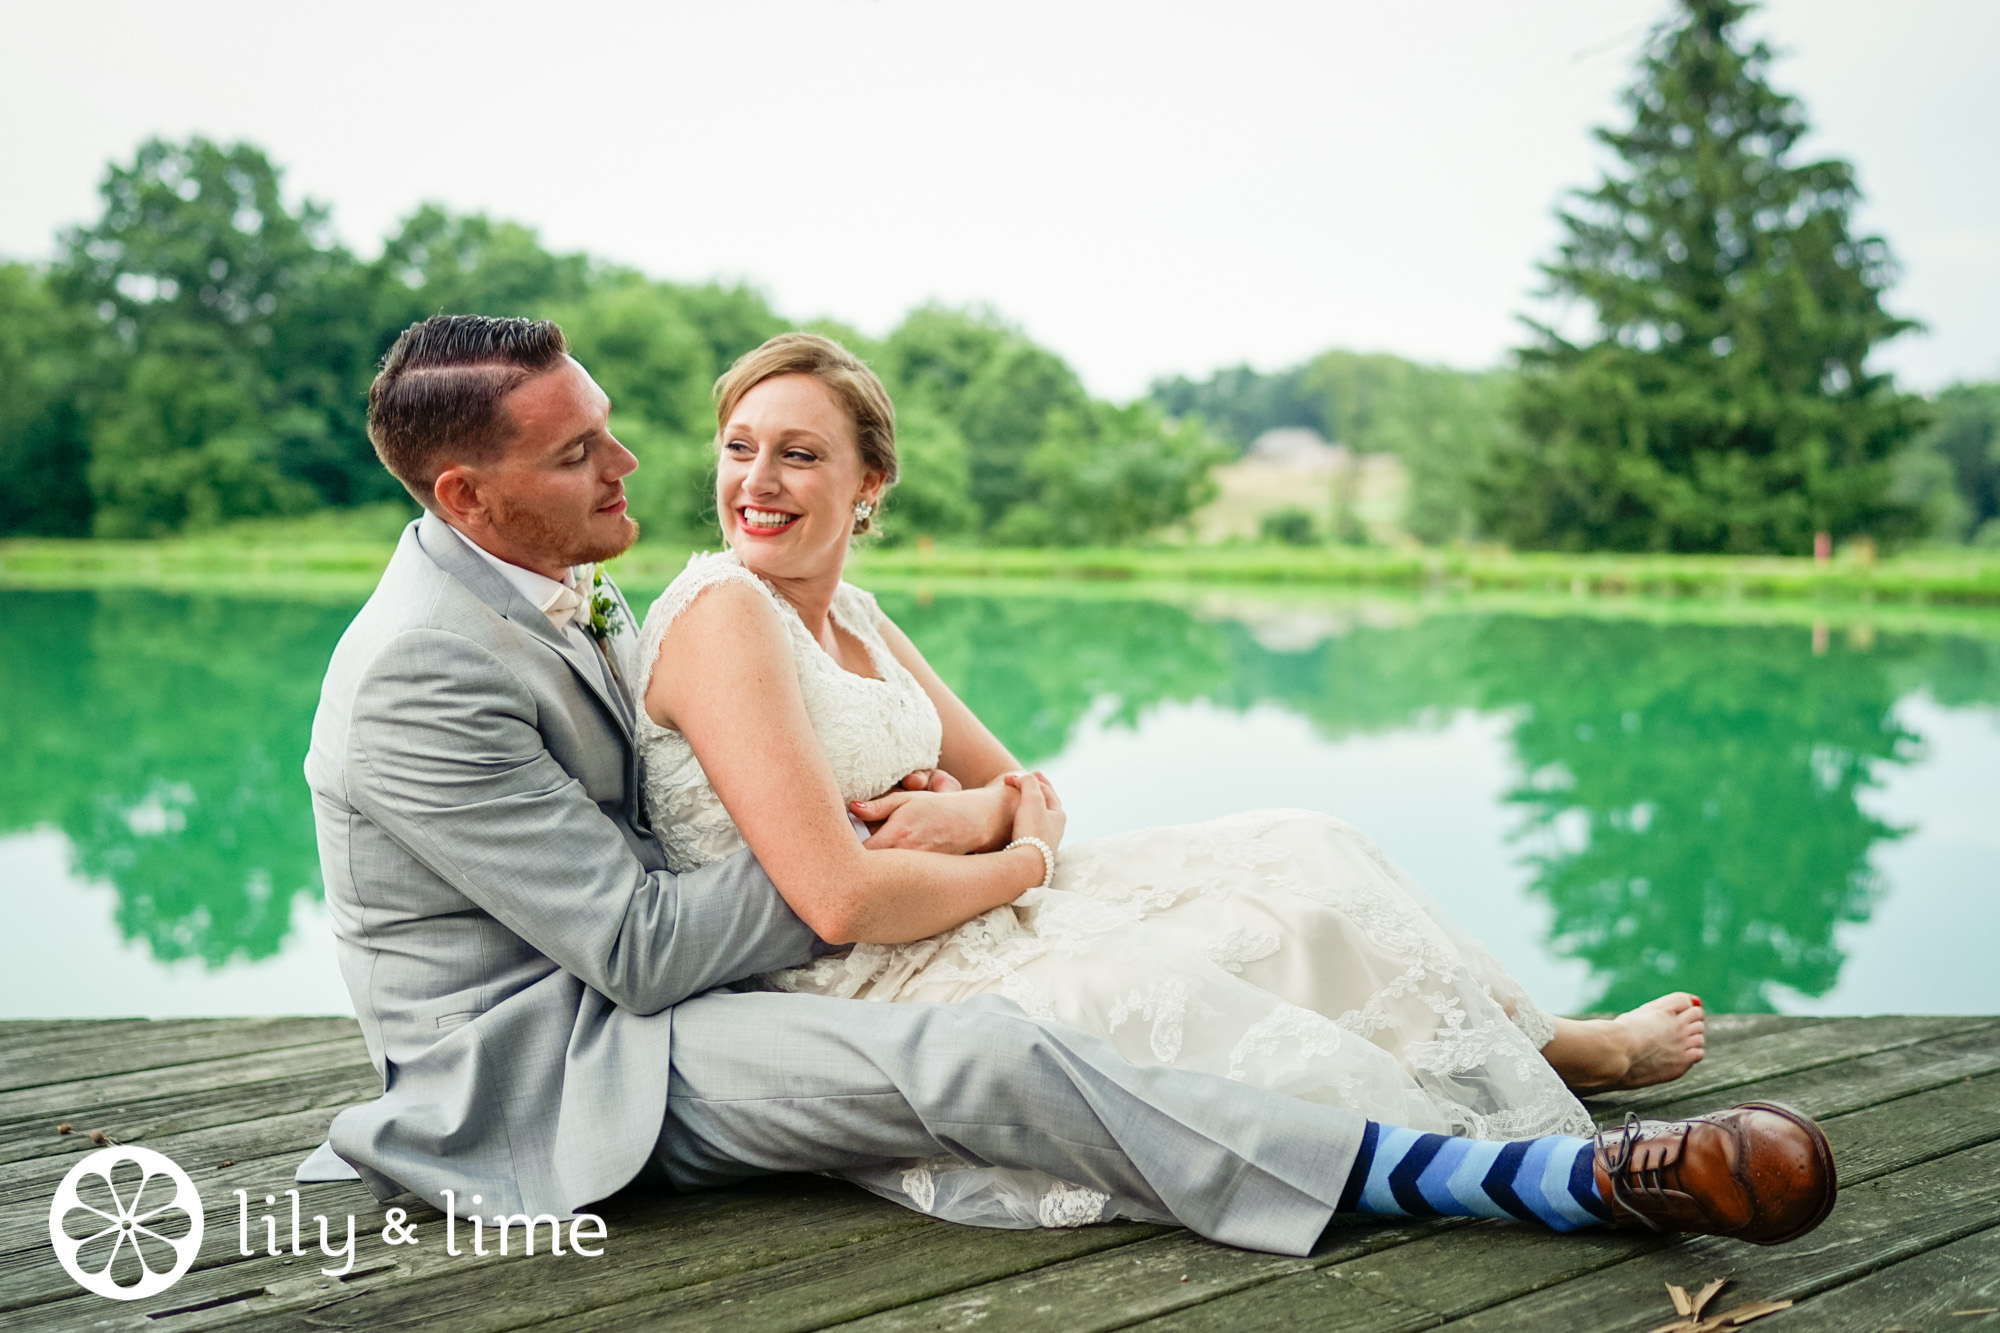 top reasons to hire a professional wedding photographer